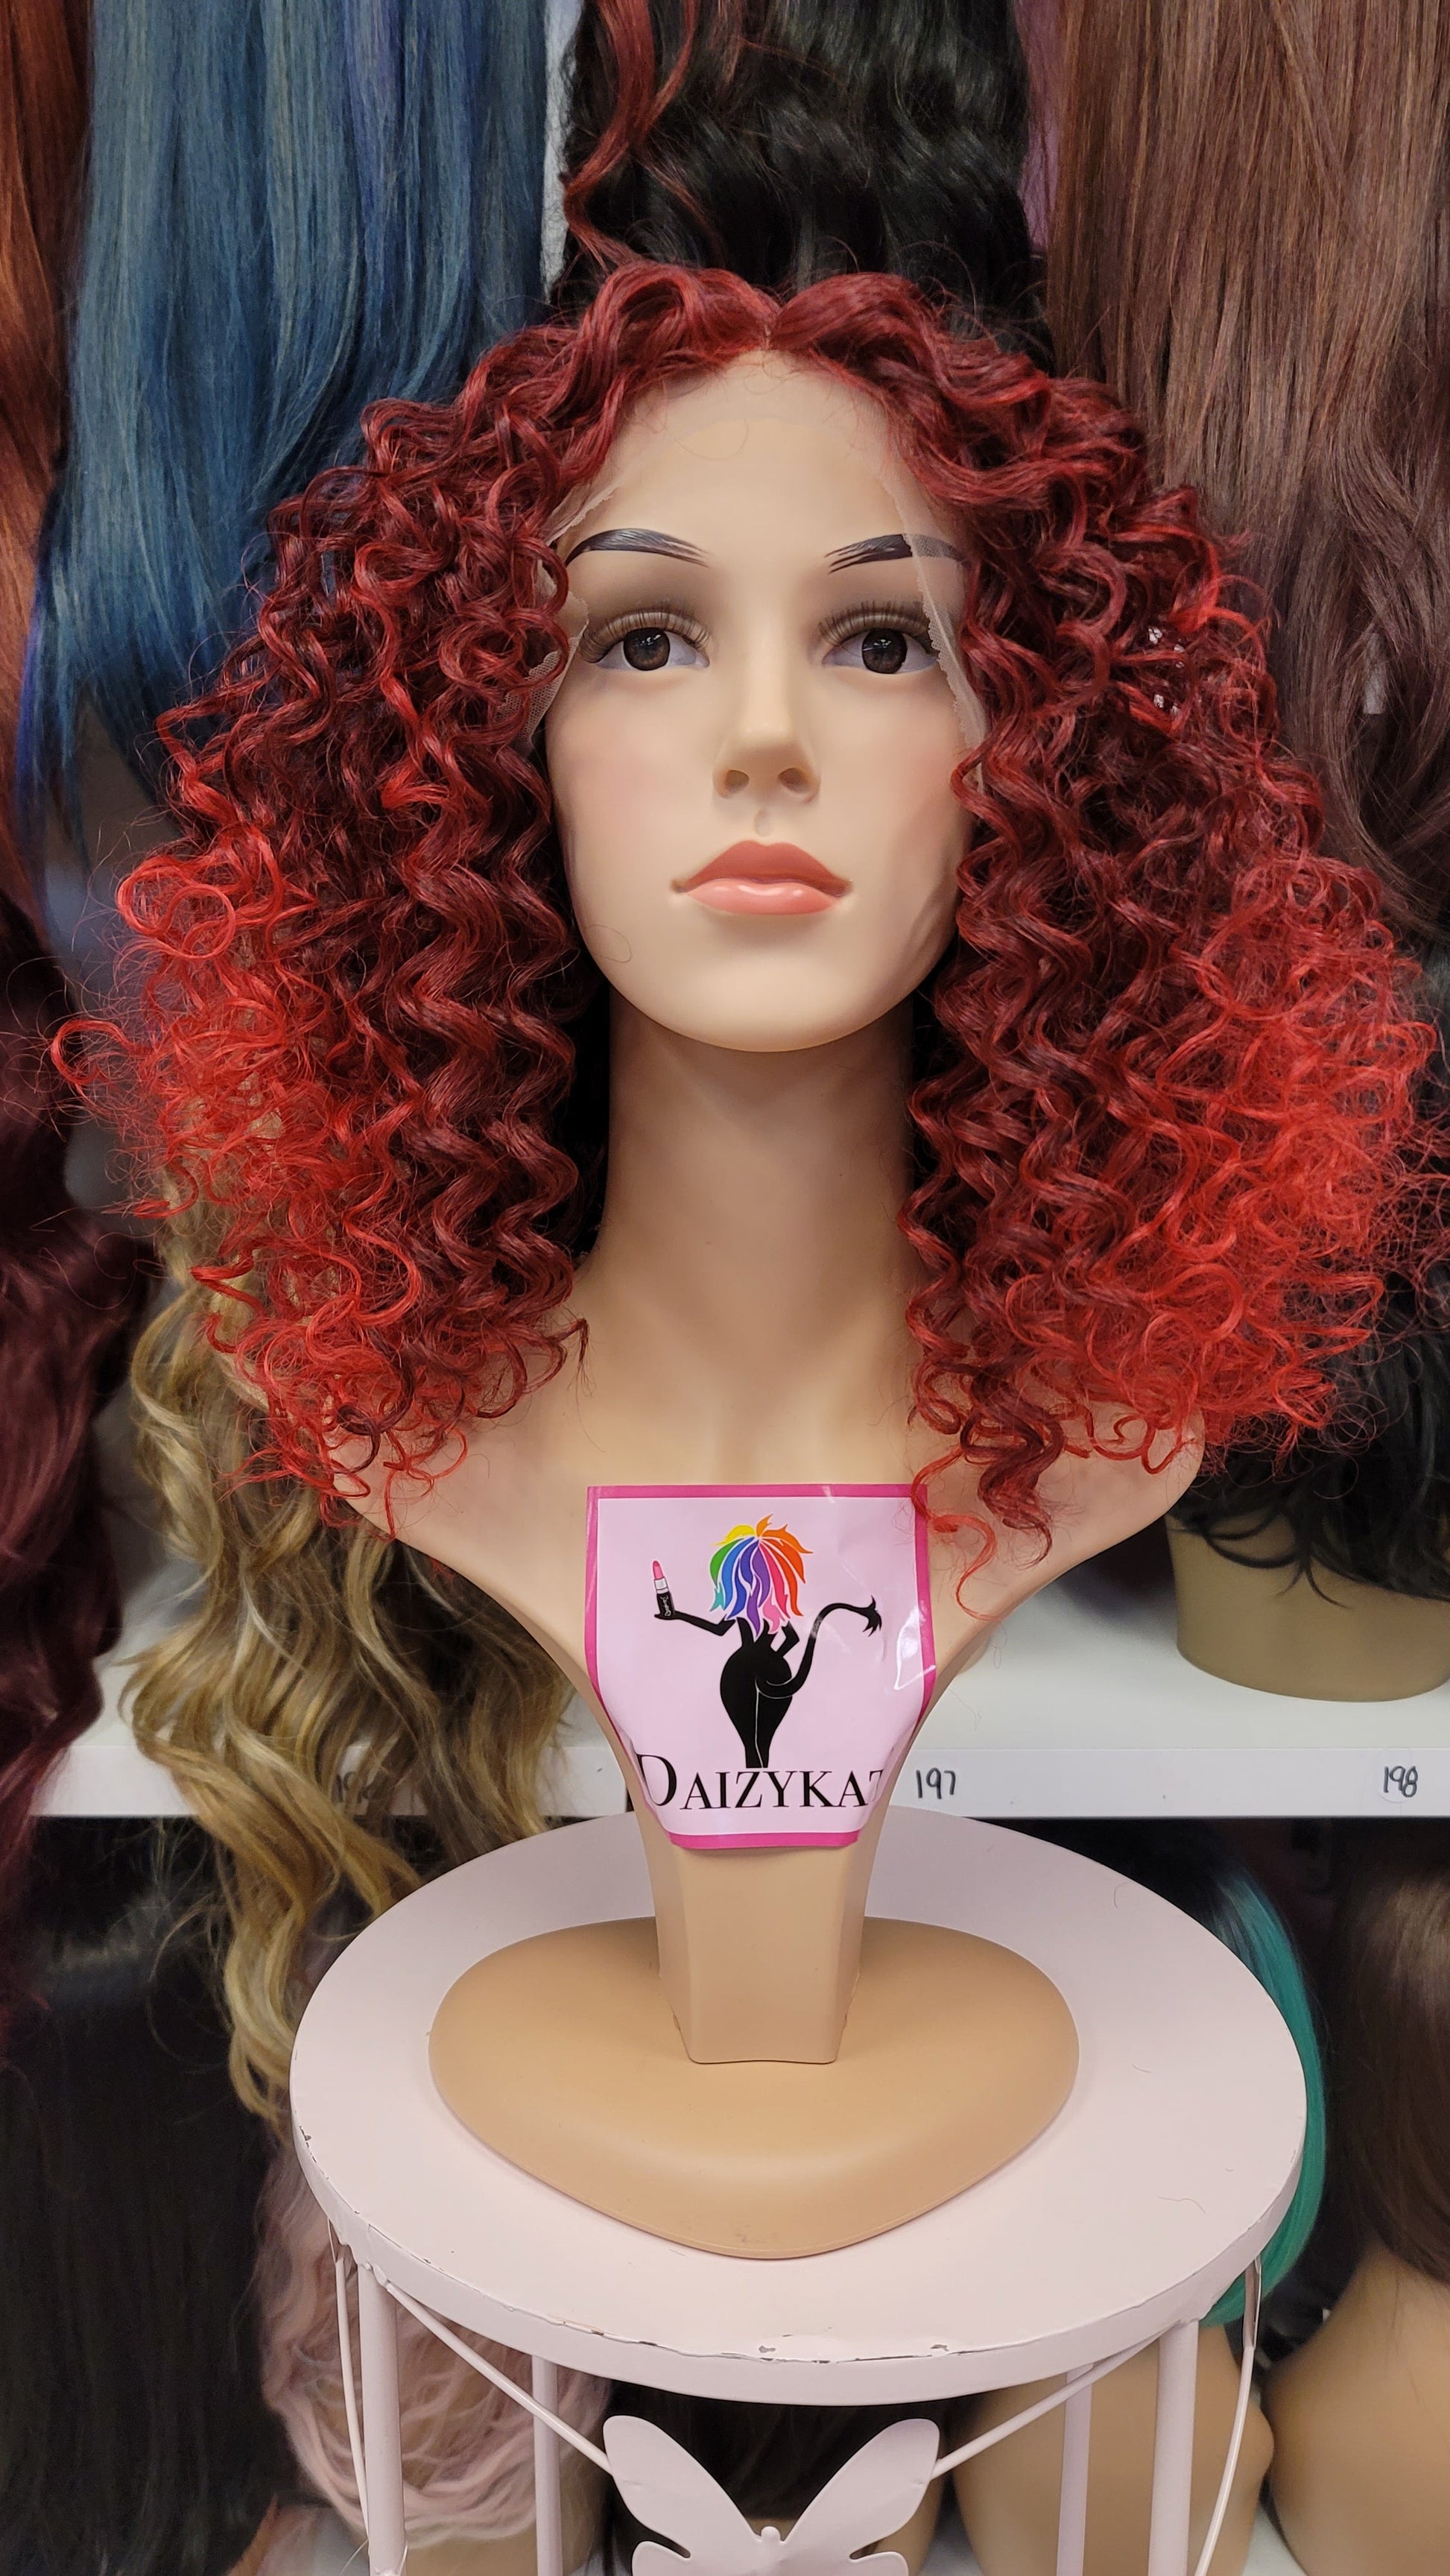 171 LUPE - Middle Part Lace Front Wig - 1B/RED - DaizyKat Cosmetics 171 LUPE - Middle Part Lace Front Wig - 1B/RED DaizyKat Cosmetics Wigs